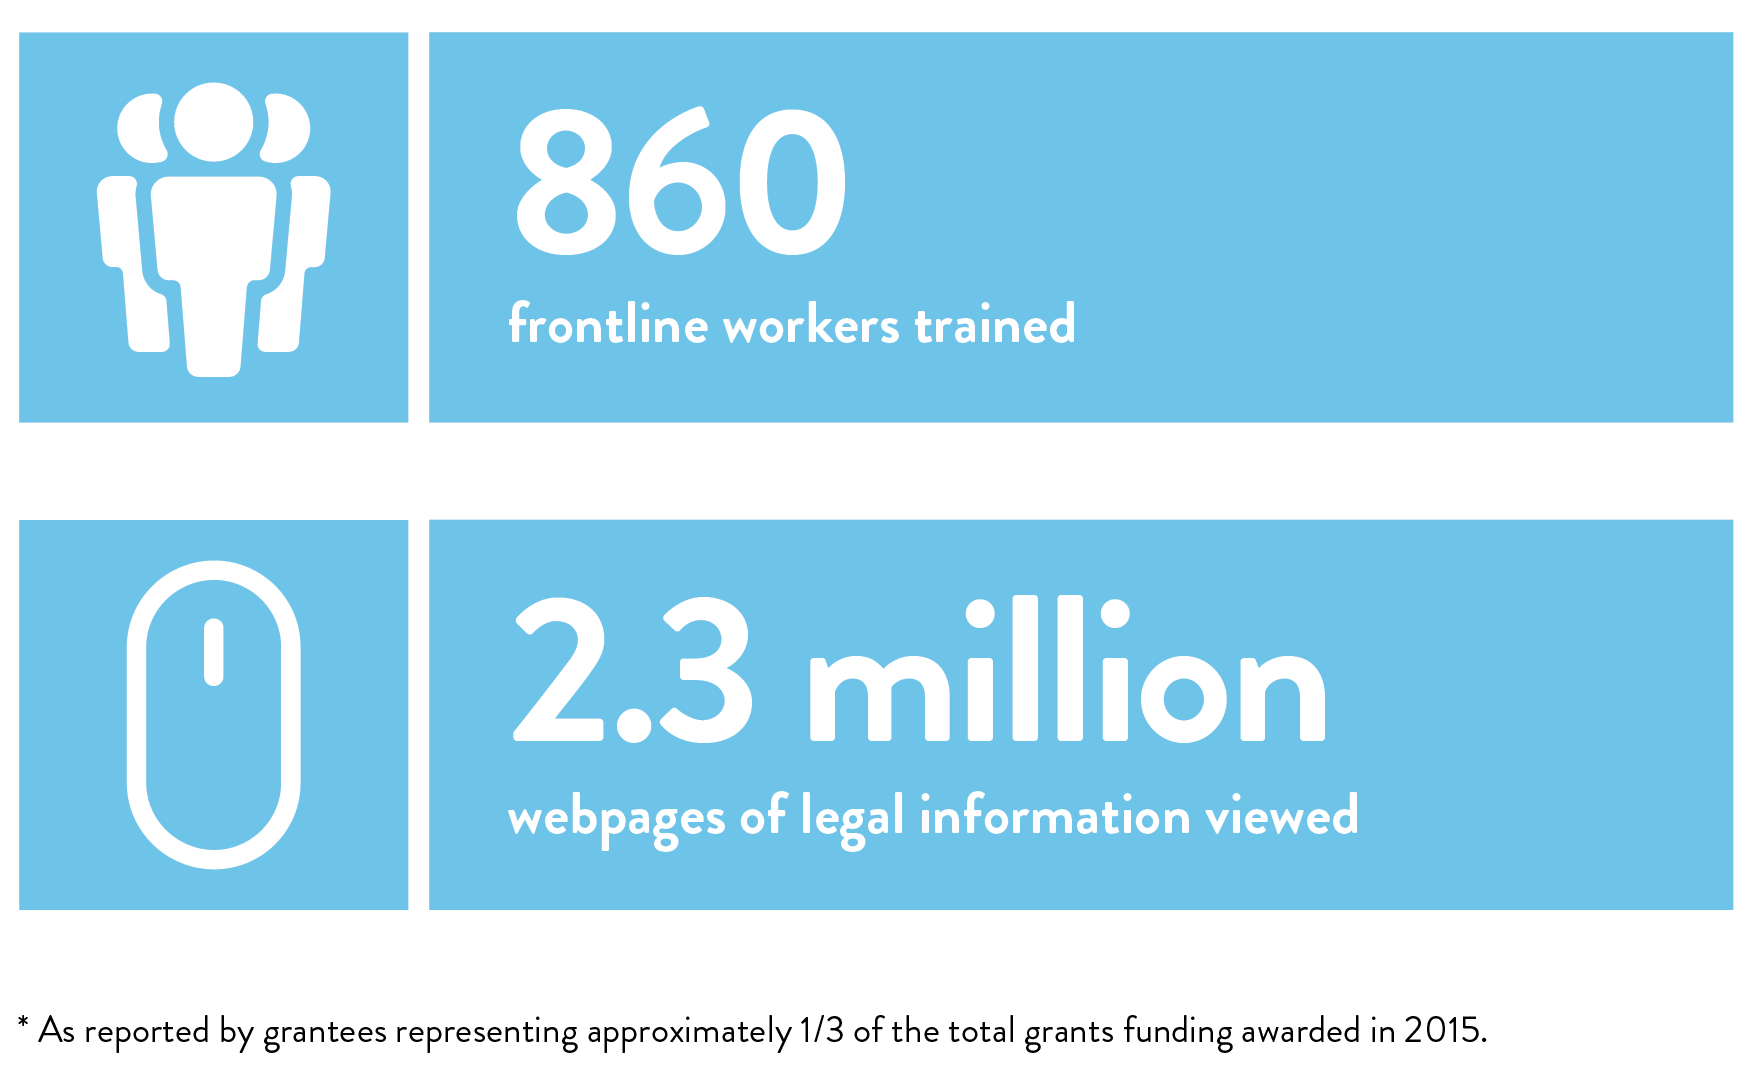 860 frontline workers trained; 2.3 million webpages of legal information viewed